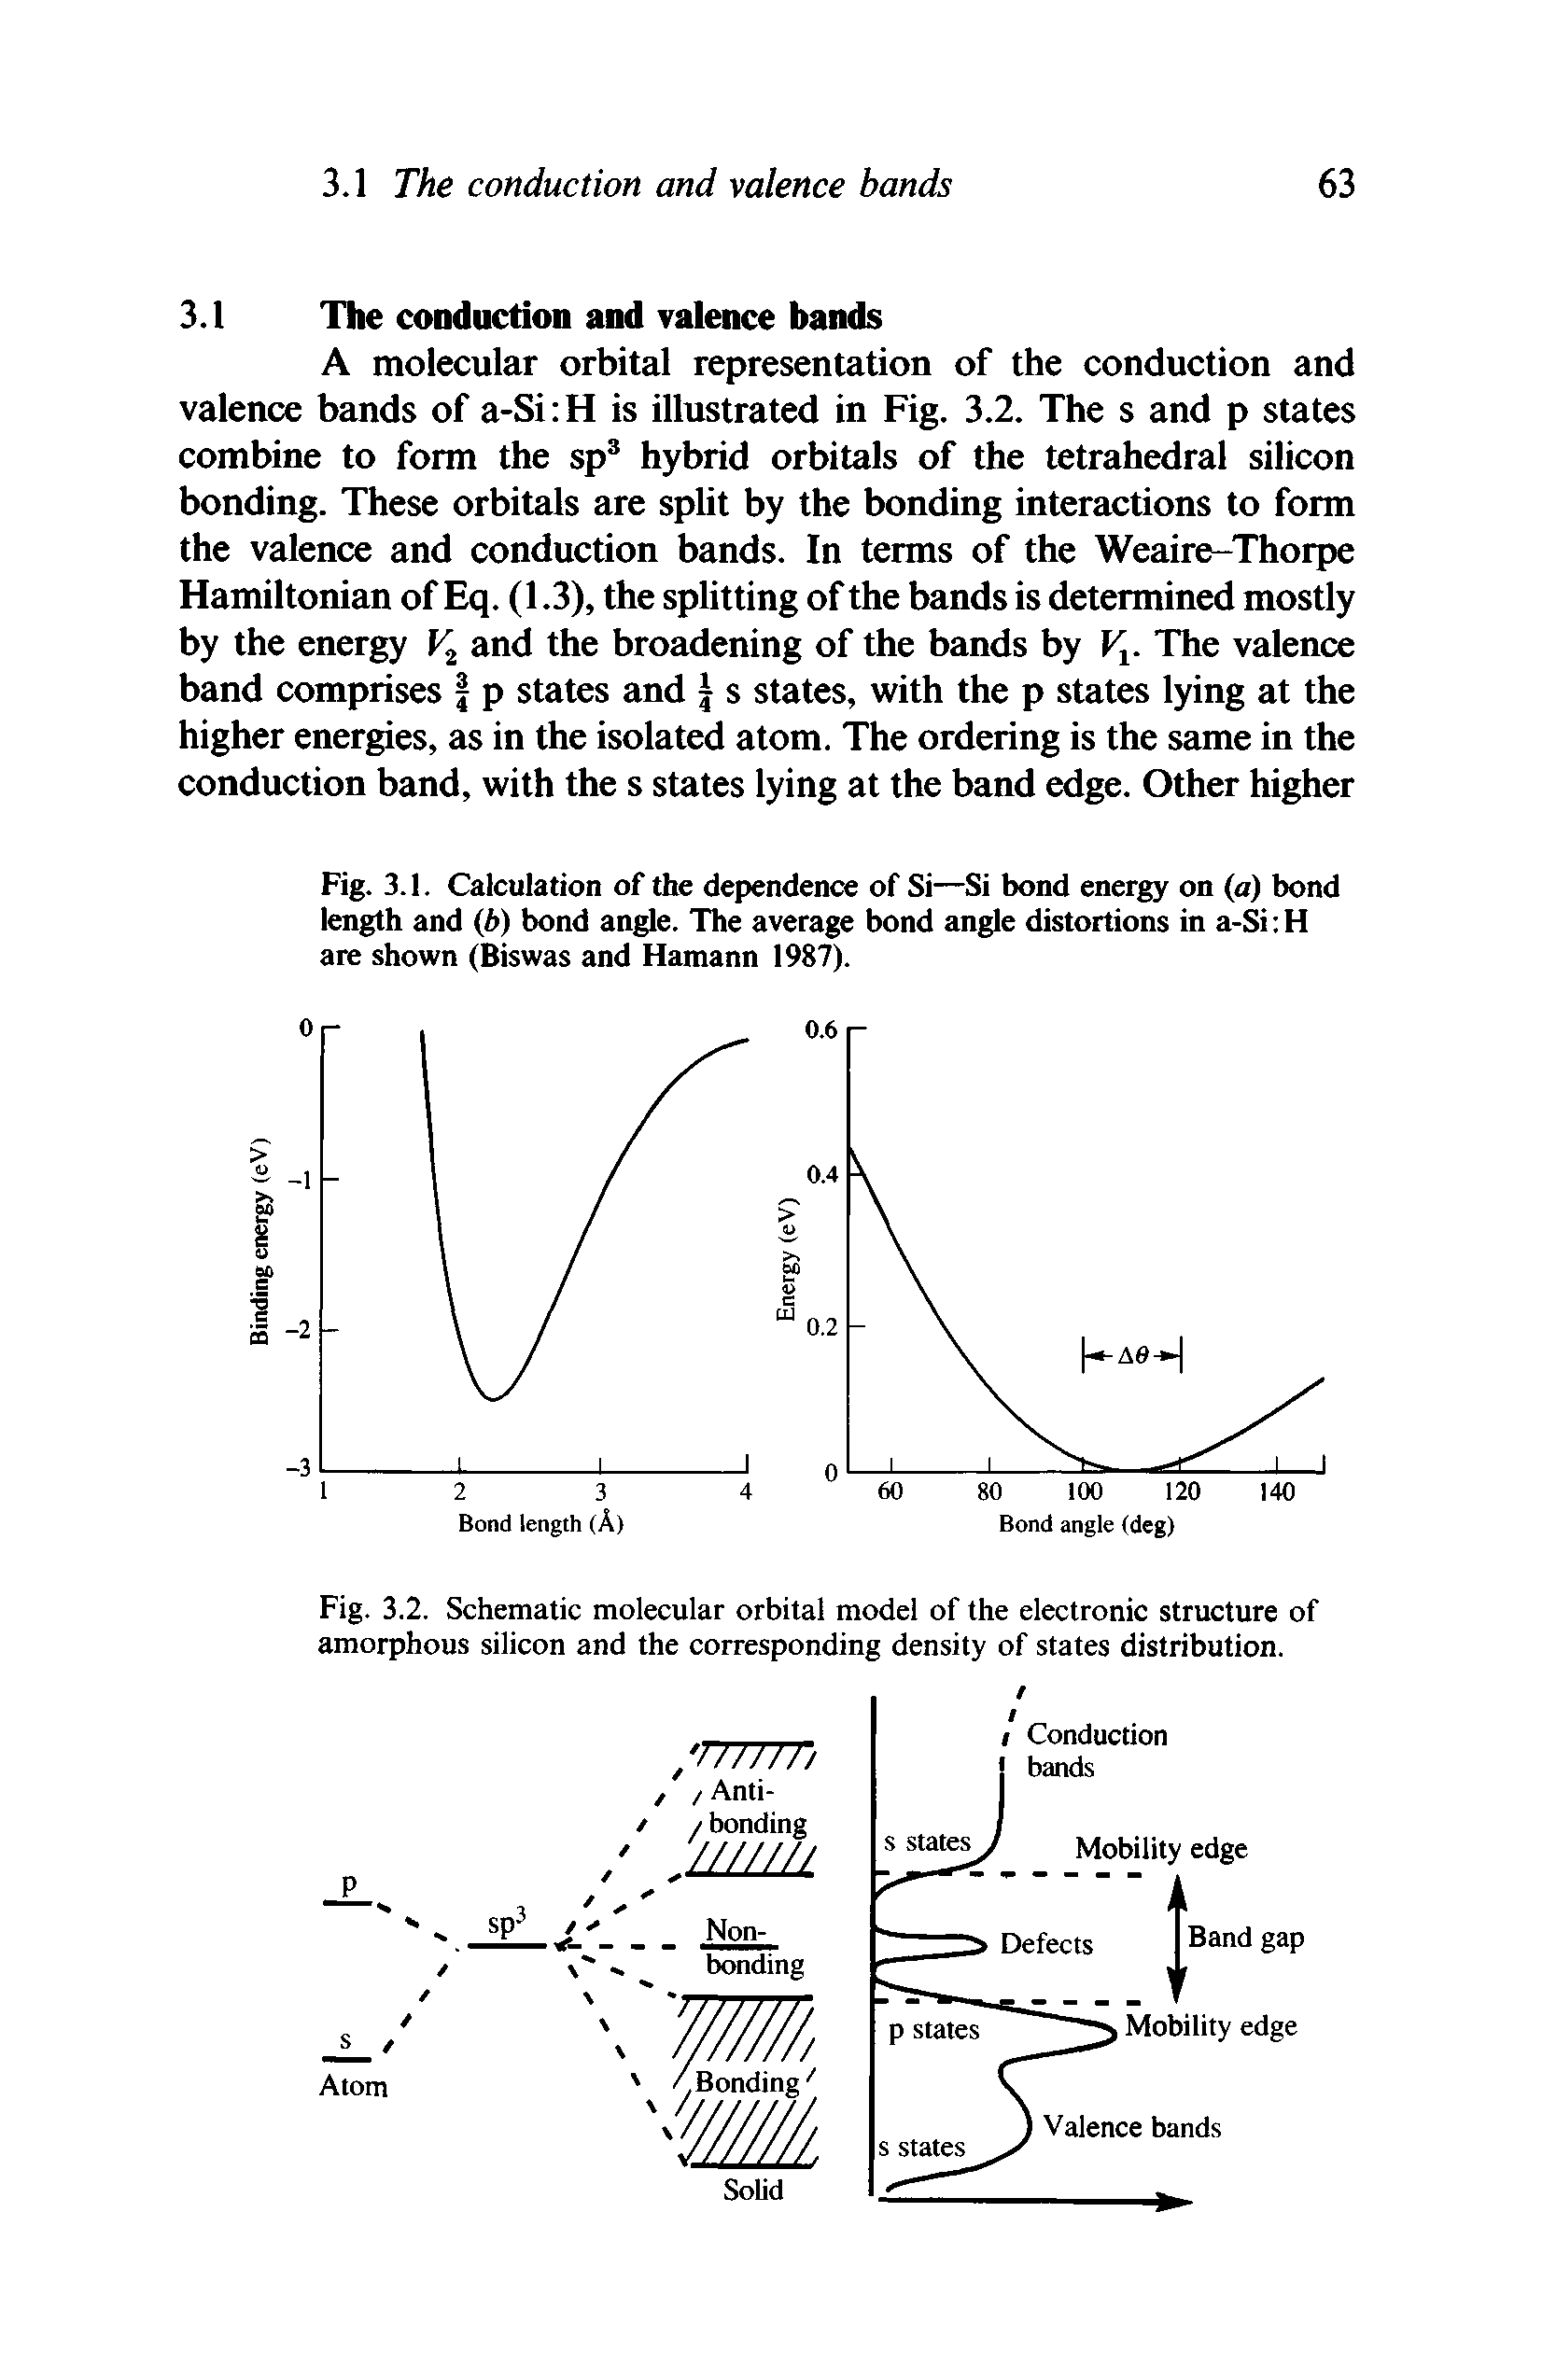 Fig. 3.1. Calculation of the dependence of Si—Si bond energy on (a) bond length and (h) bond angle. The average bond angle distortions in a-Si H are shown (Biswas and Hamann 1987).